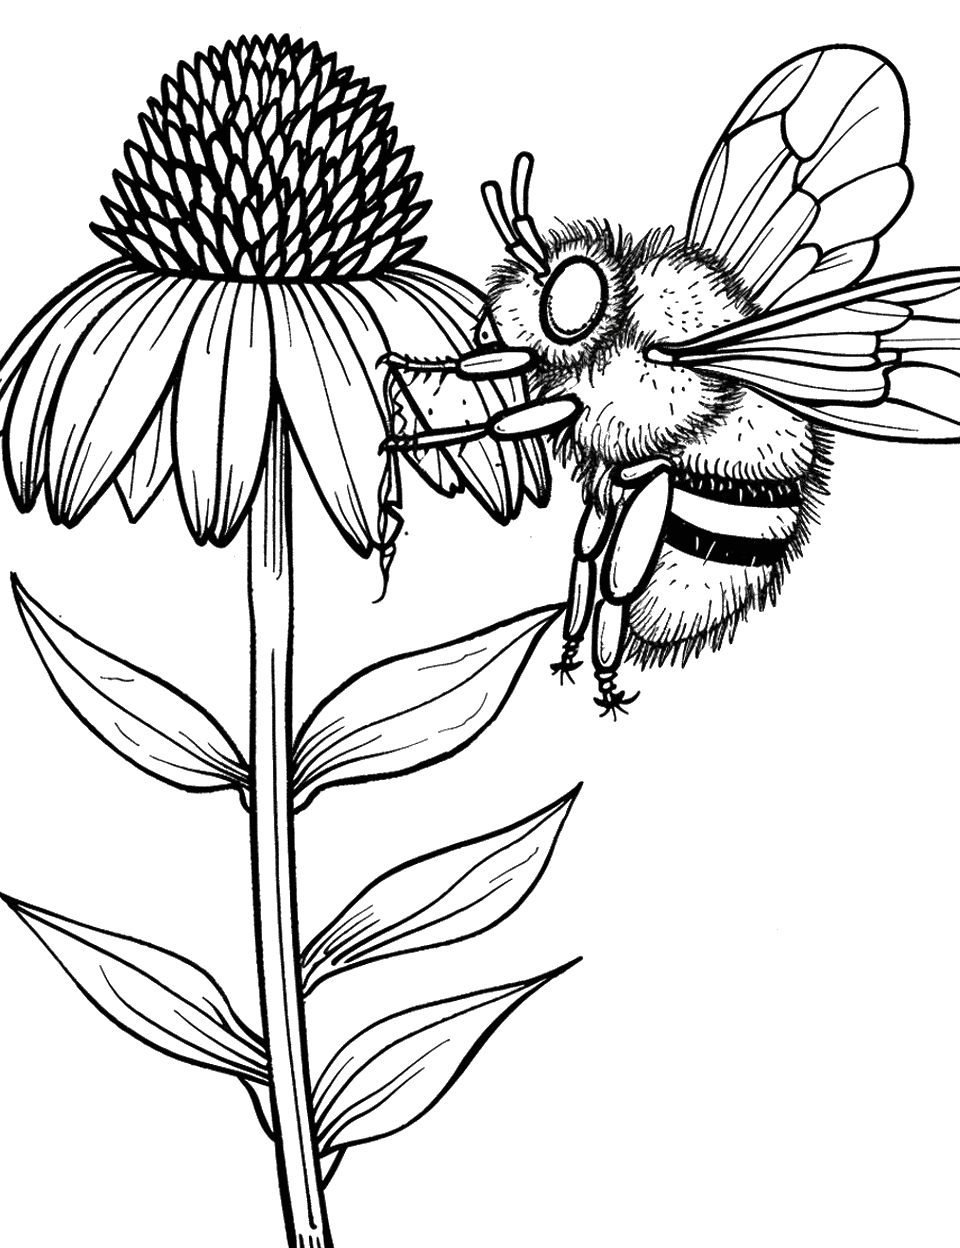 Bee and Echinacea Coloring Page - A bee ready to gathe nectar from the spiky center of an echinacea flower.